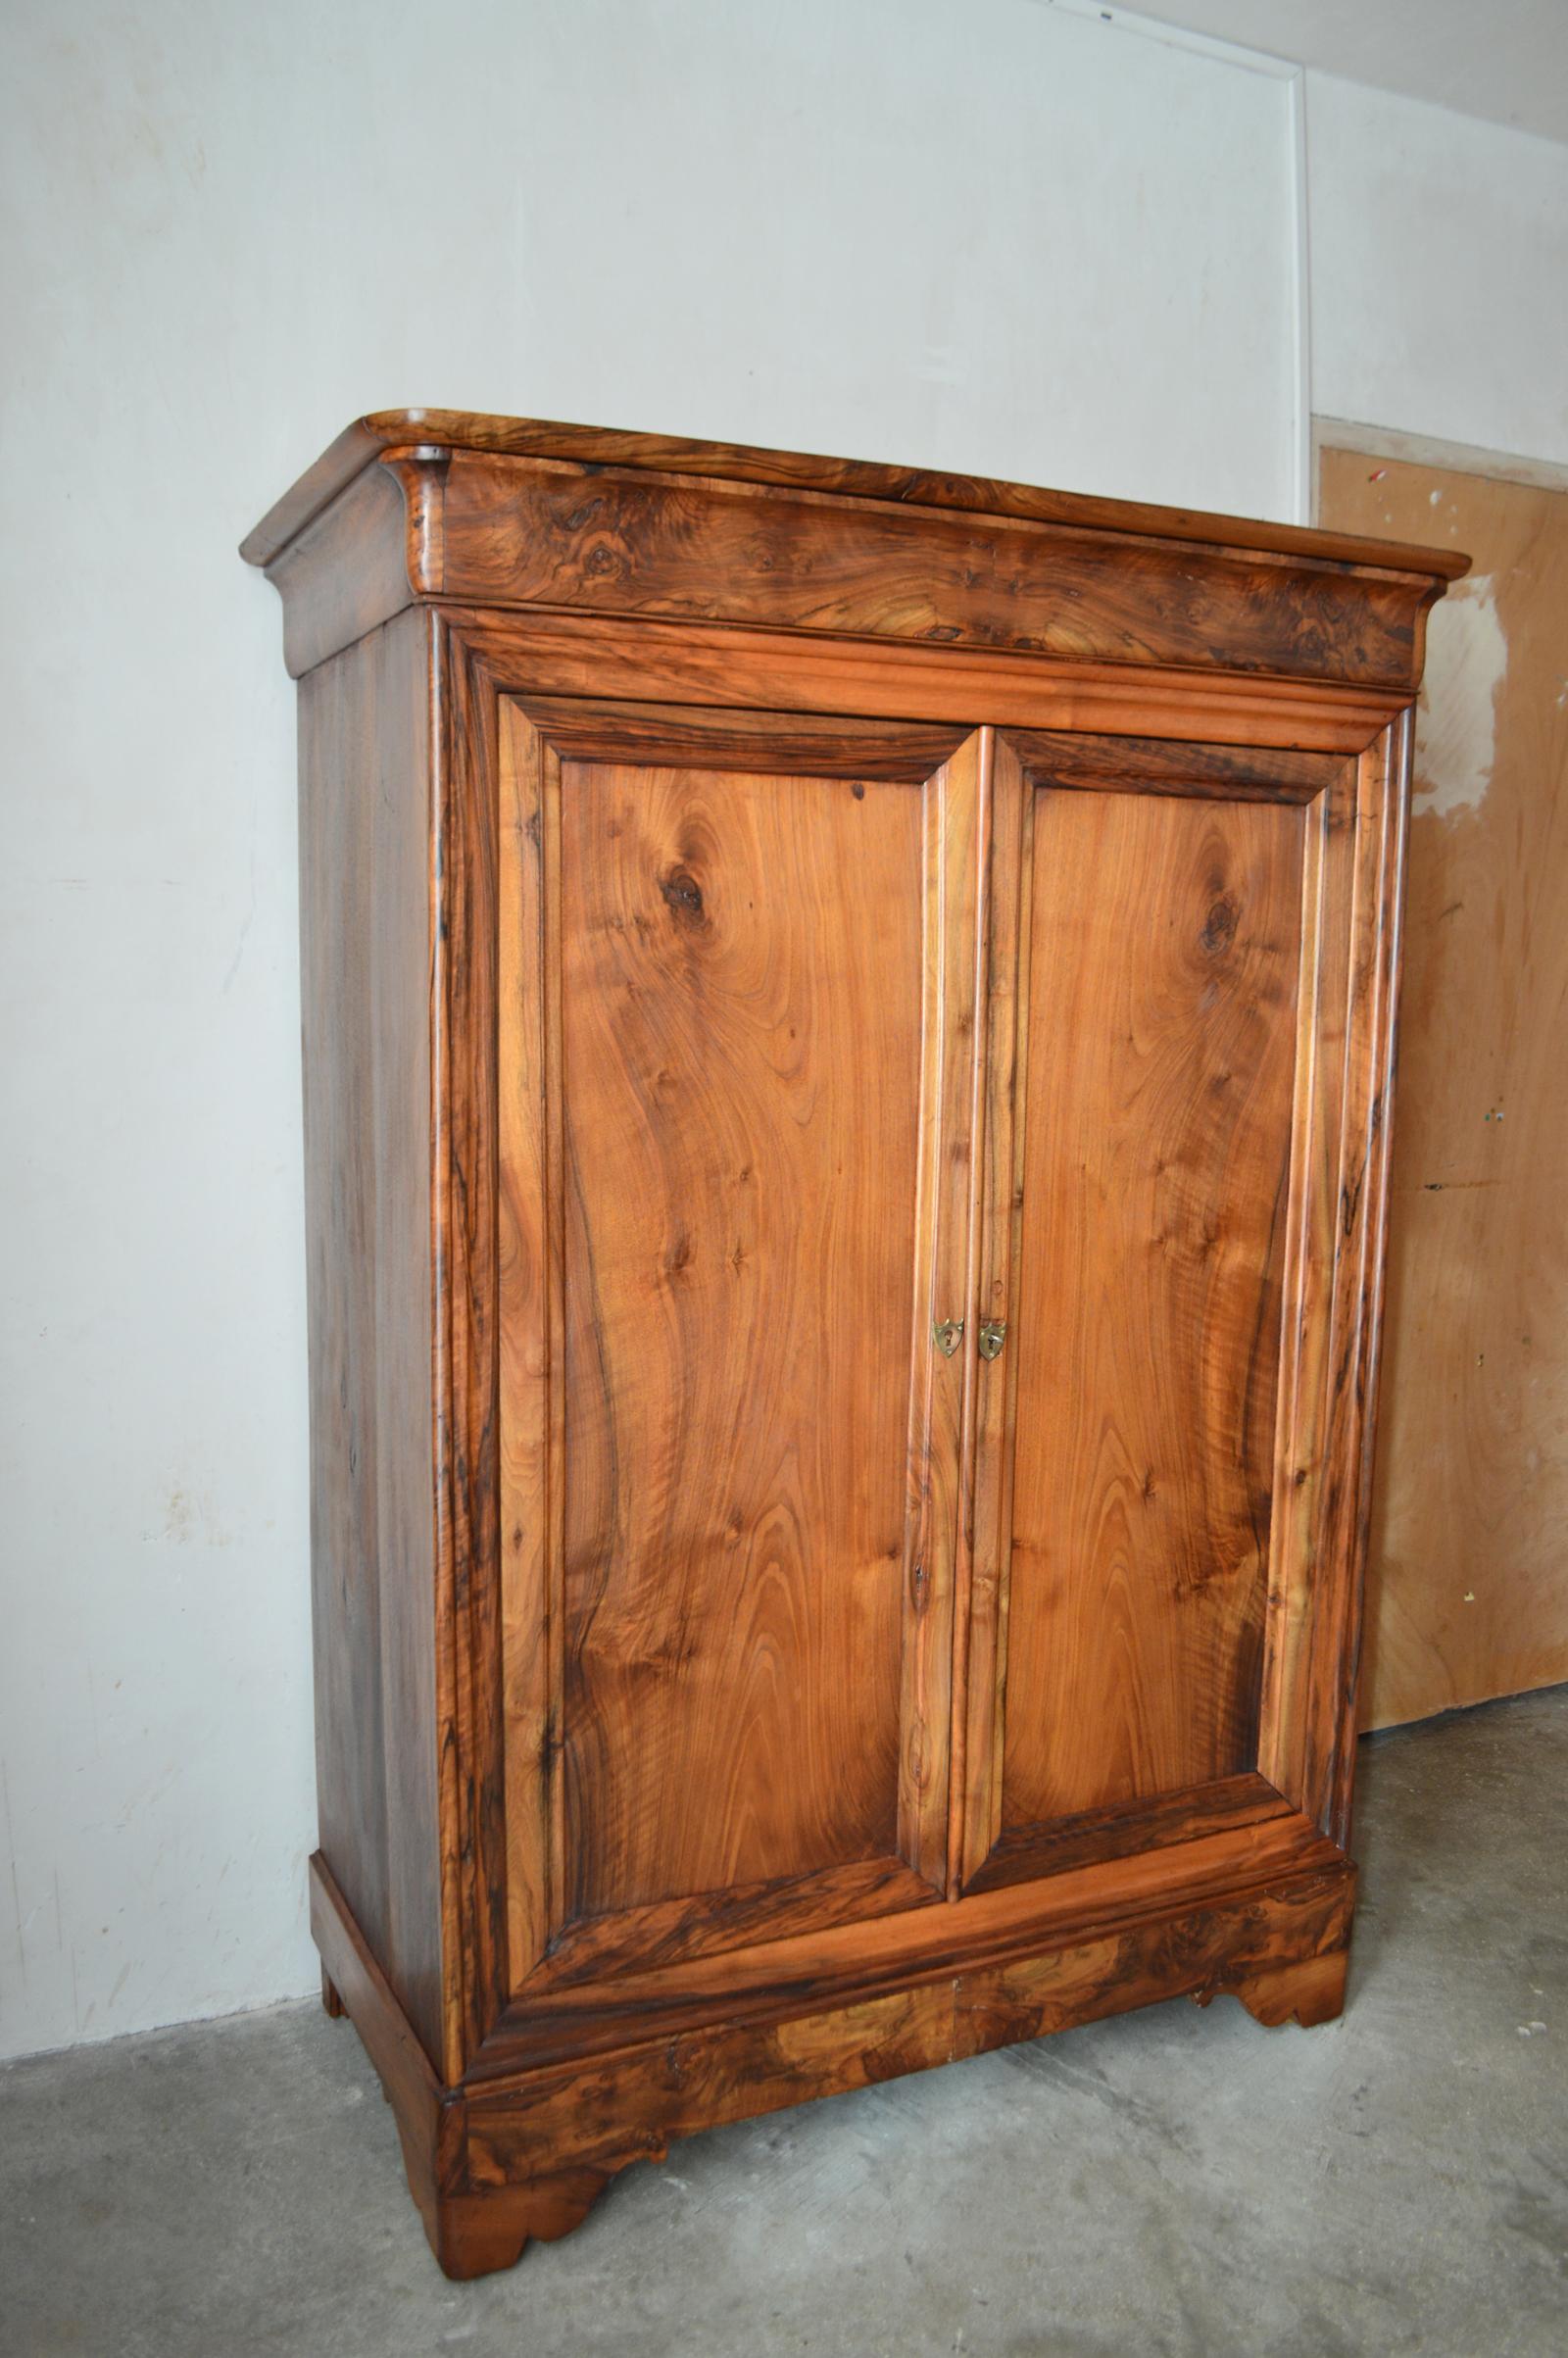 Unusual small sized wardrobe / armoire, ideal in an entrance hall.

Louis-Philippe period, circa 1840-1850, France.

The closet contains a bar to carry clothes. 
Above the cupboard a drawer in the cornice.

Good general condition, lock in